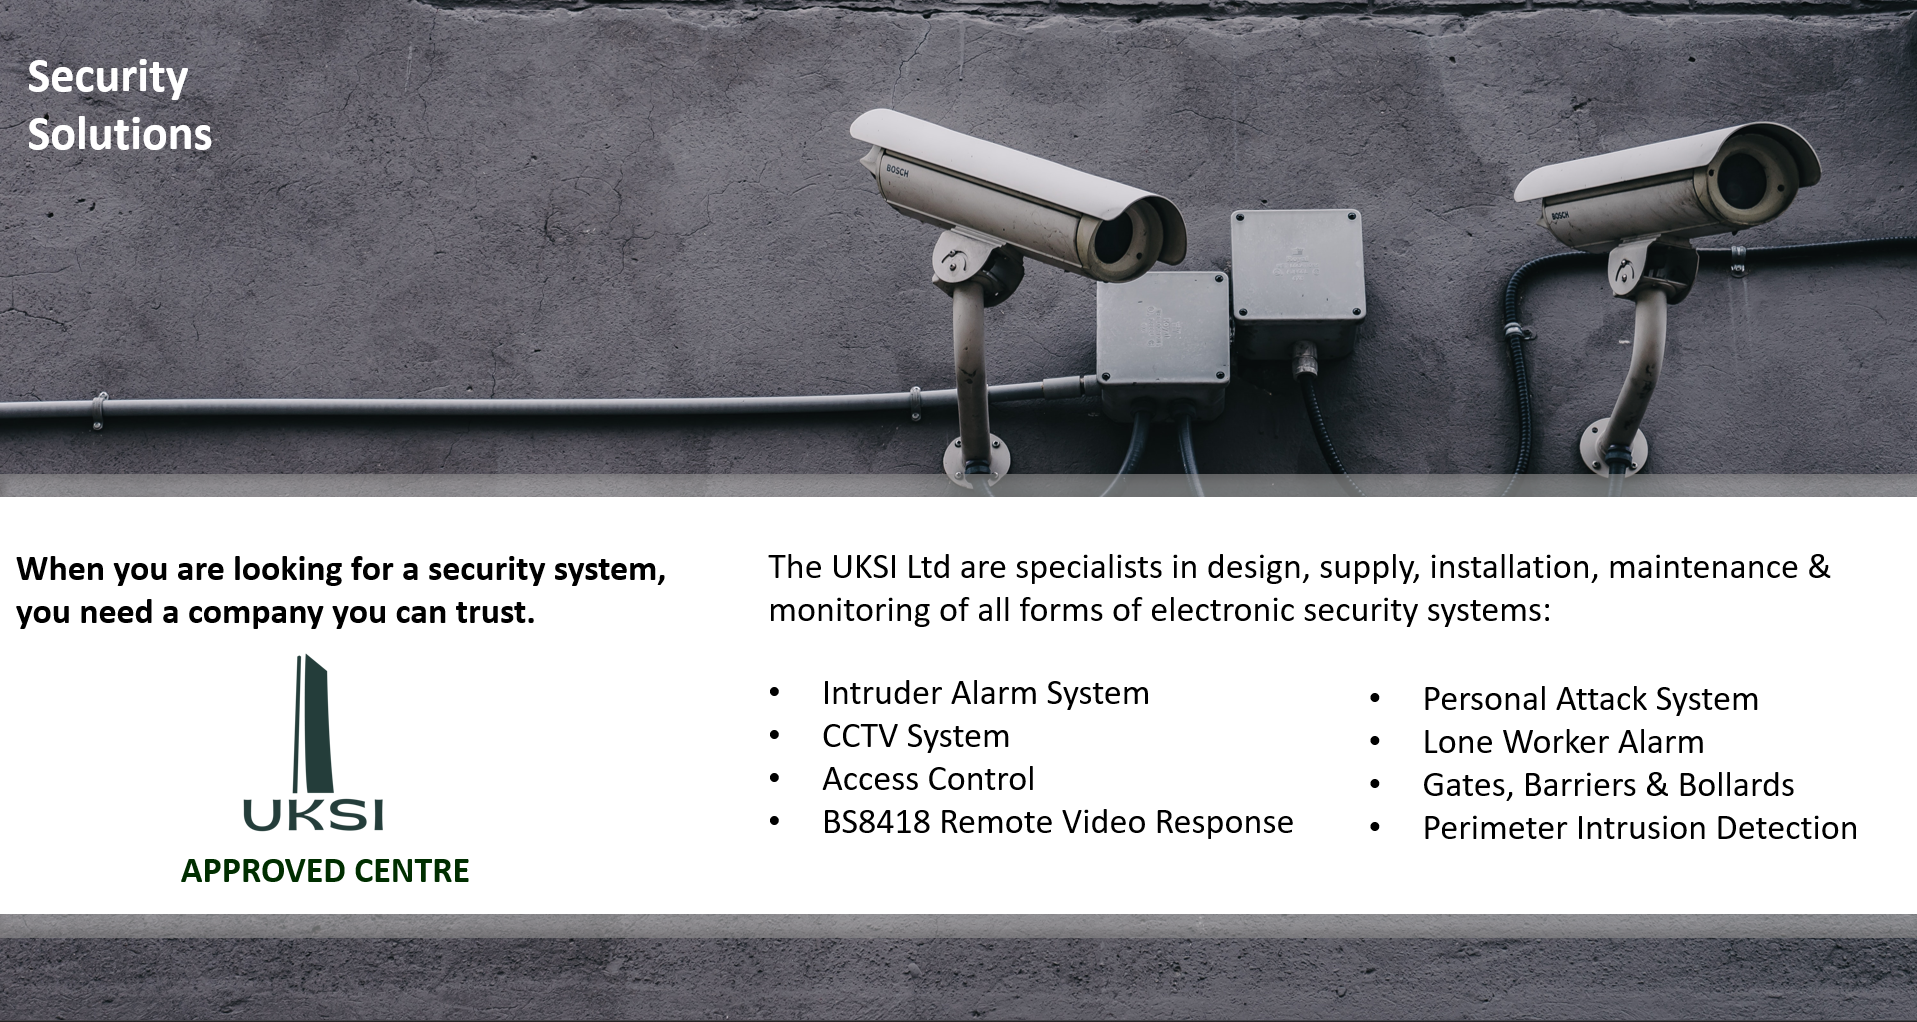 CCTV Systems and access control